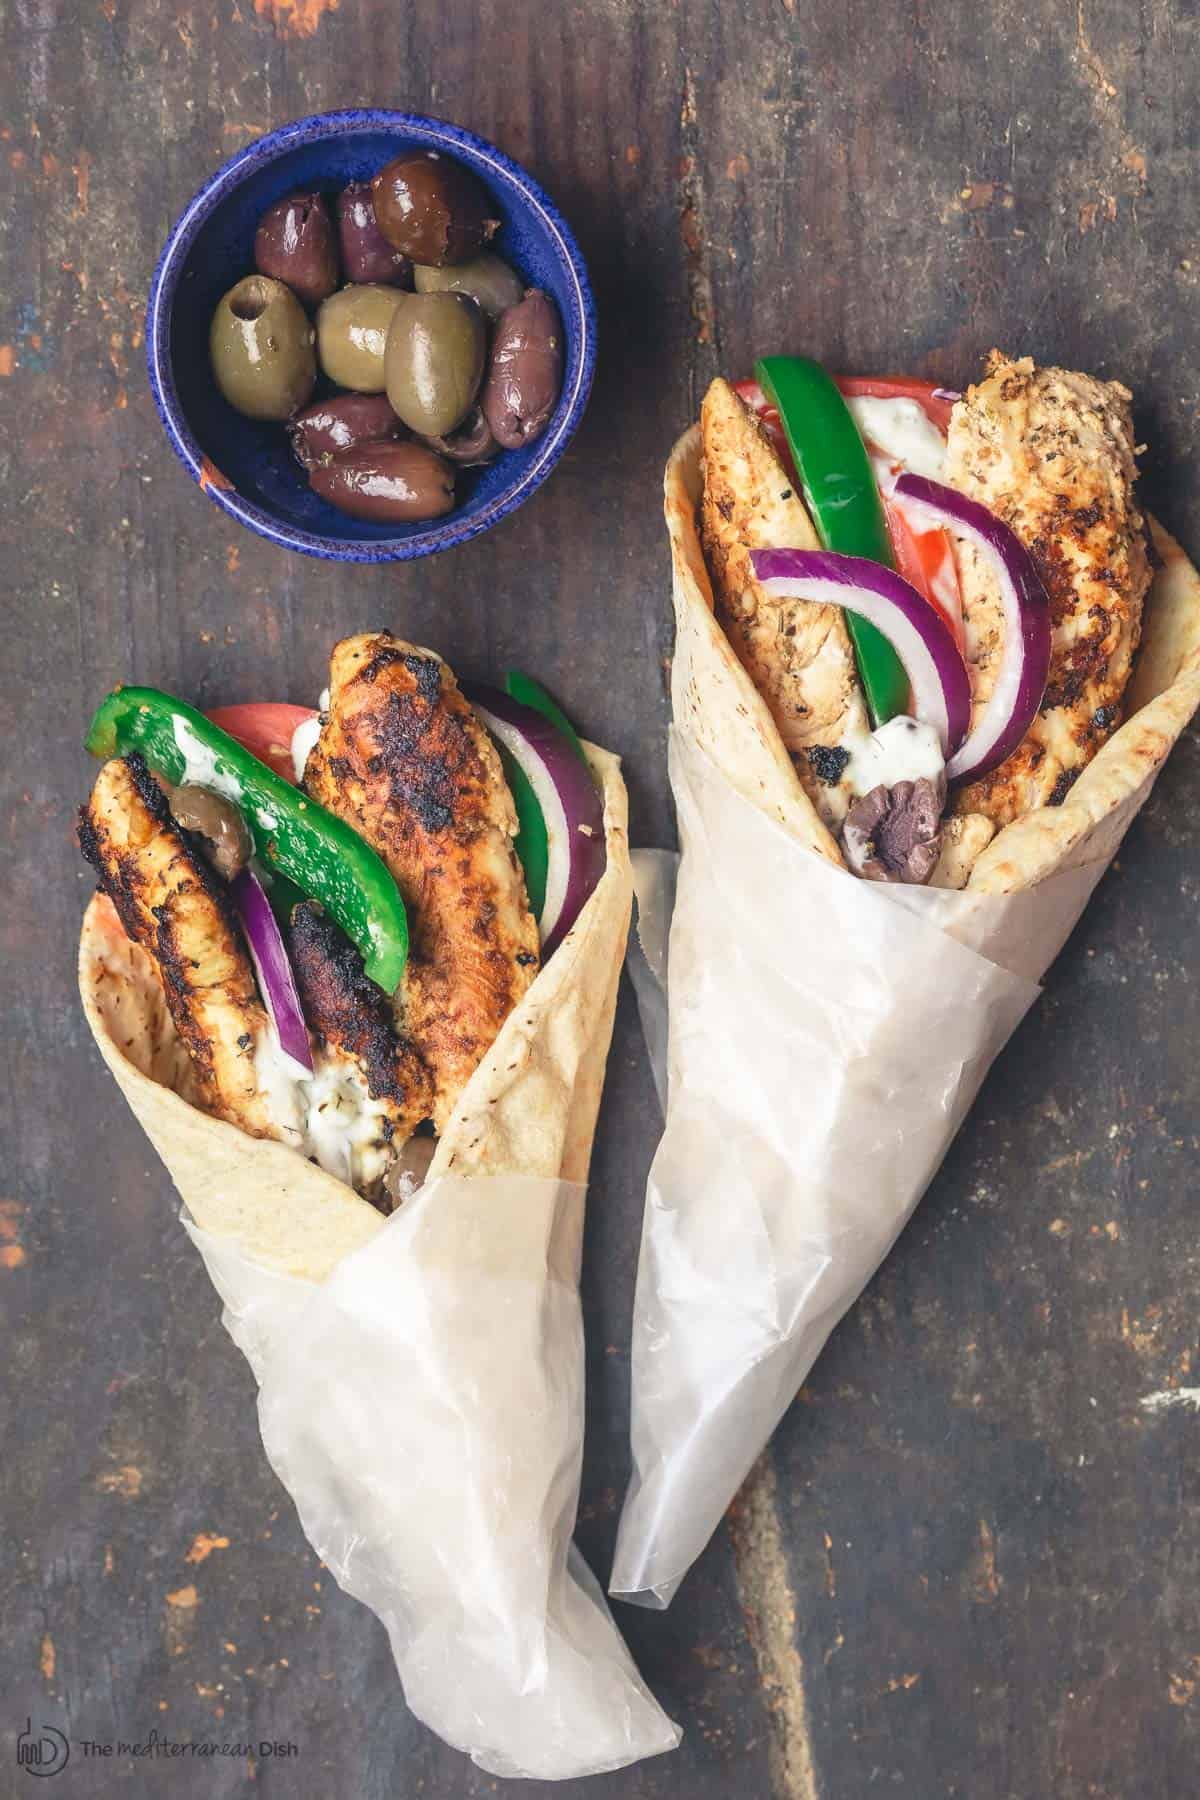 Chicken gyros wraps served with black and green olives